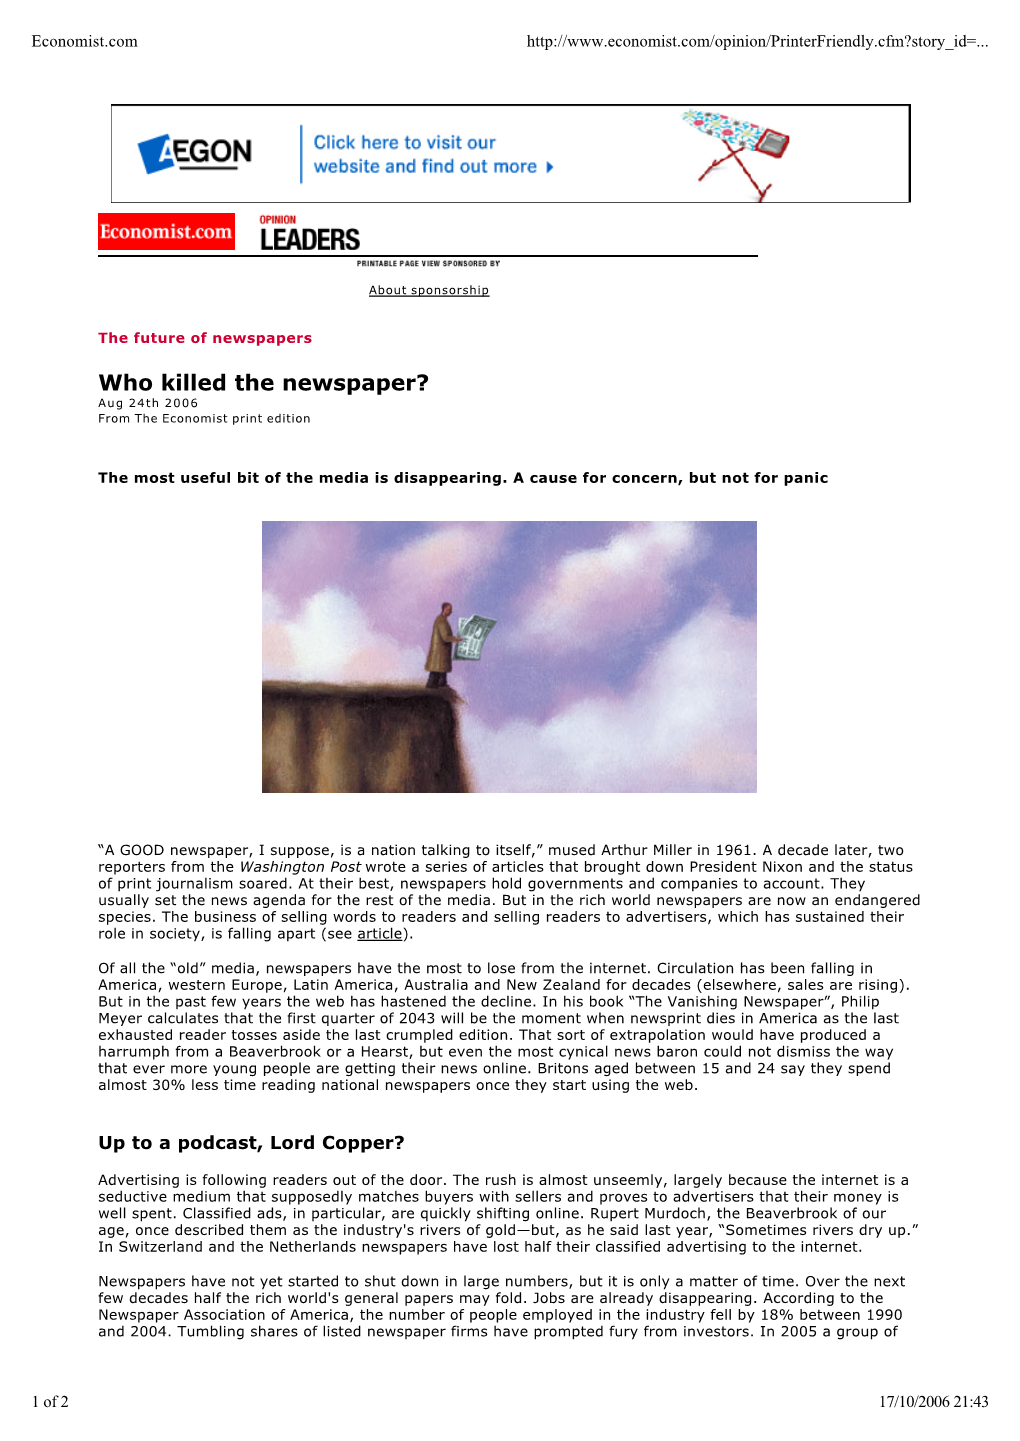 Who Killed the Newspaper? Aug 24Th 2006 from the Economist Print Edition